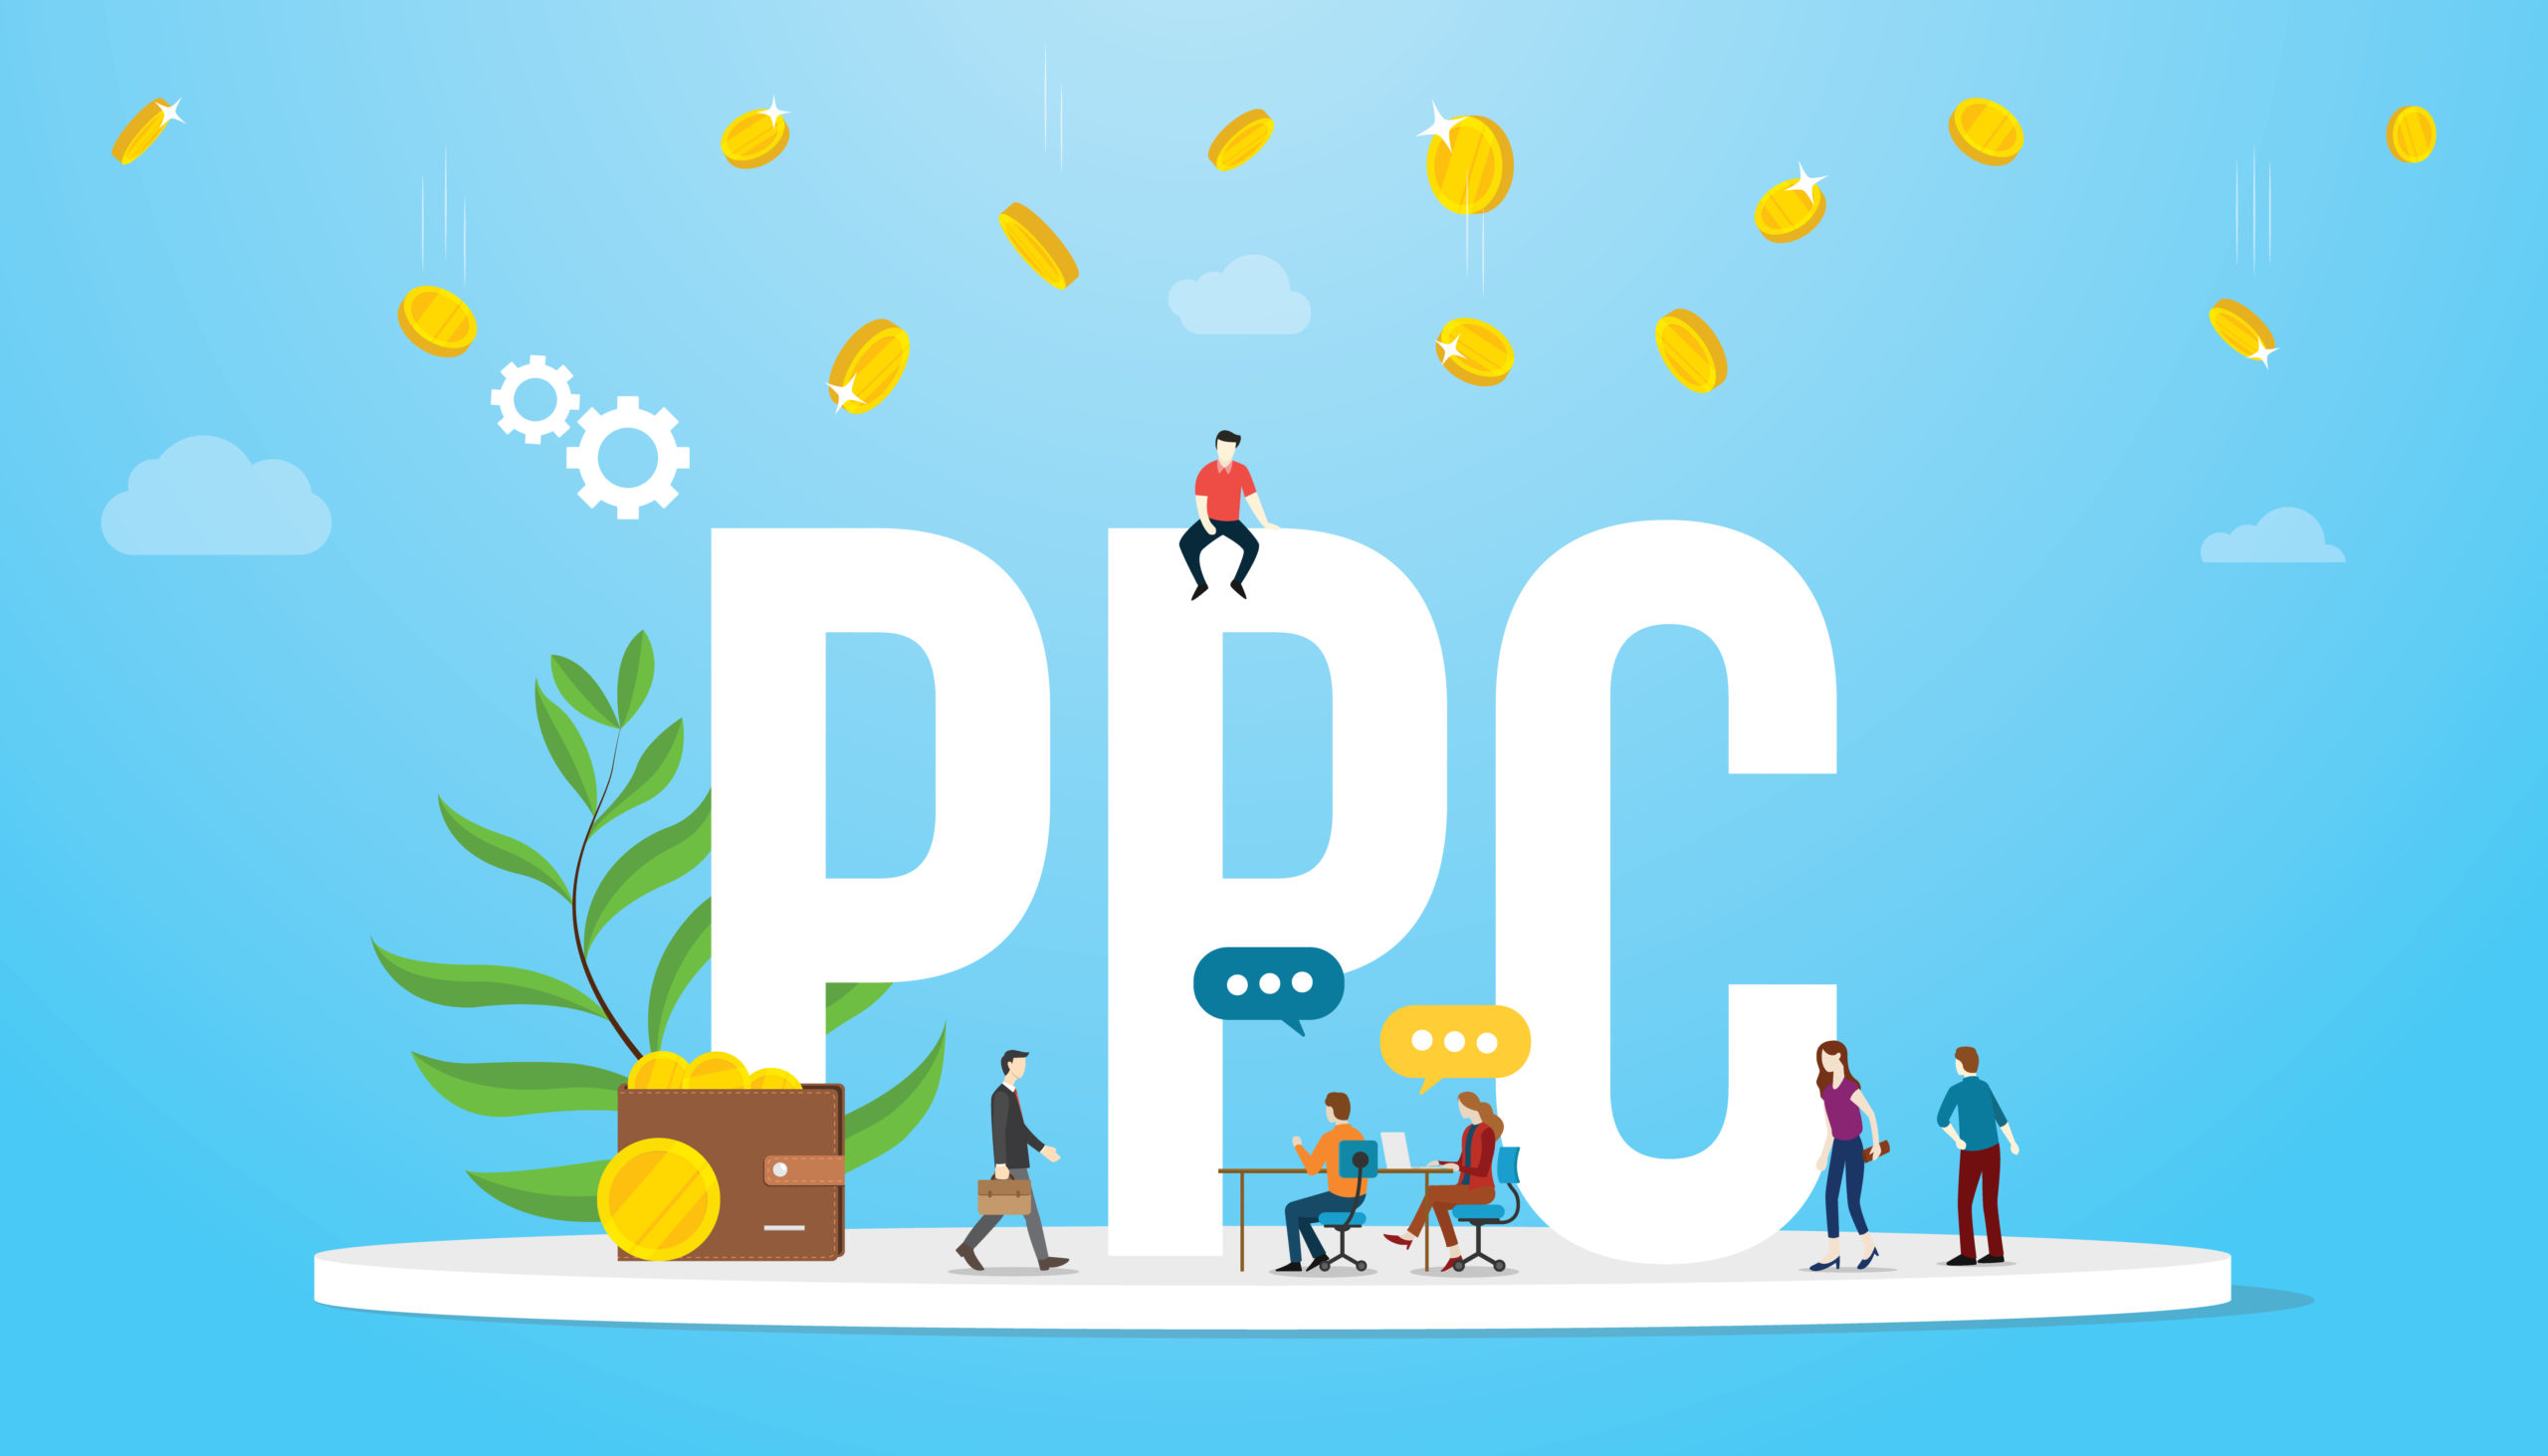 What is PPC